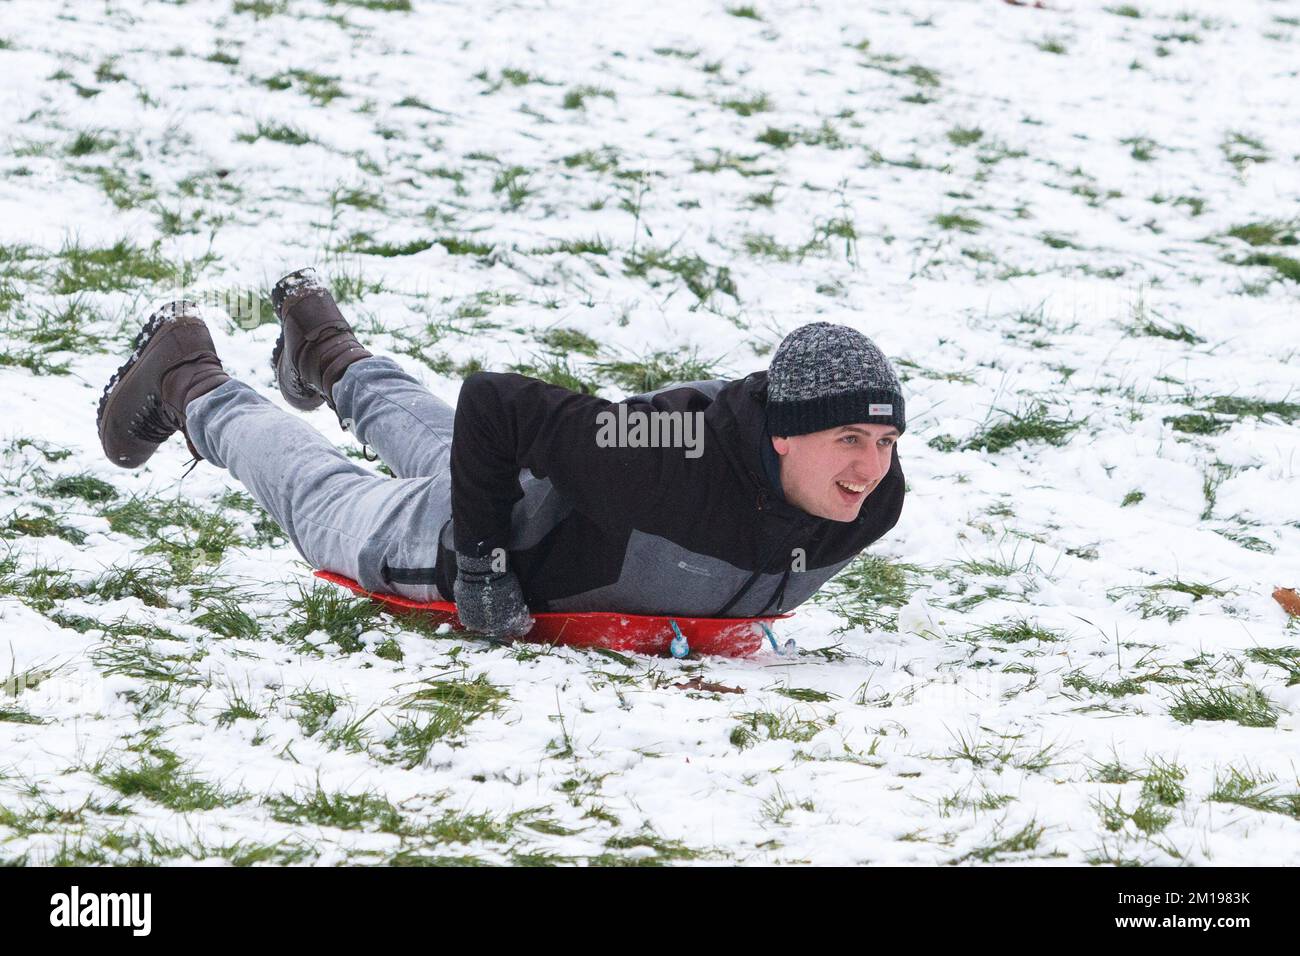 Chippenham, Wiltshire, UK, 11th Dec, 2022. As Chippenham residents wake up to their first snow of the year, a man is pictured in a local park in Chippenham as he speeds down a hill on a sledge. Credit: Lynchpics/Alamy Live News. Stock Photo